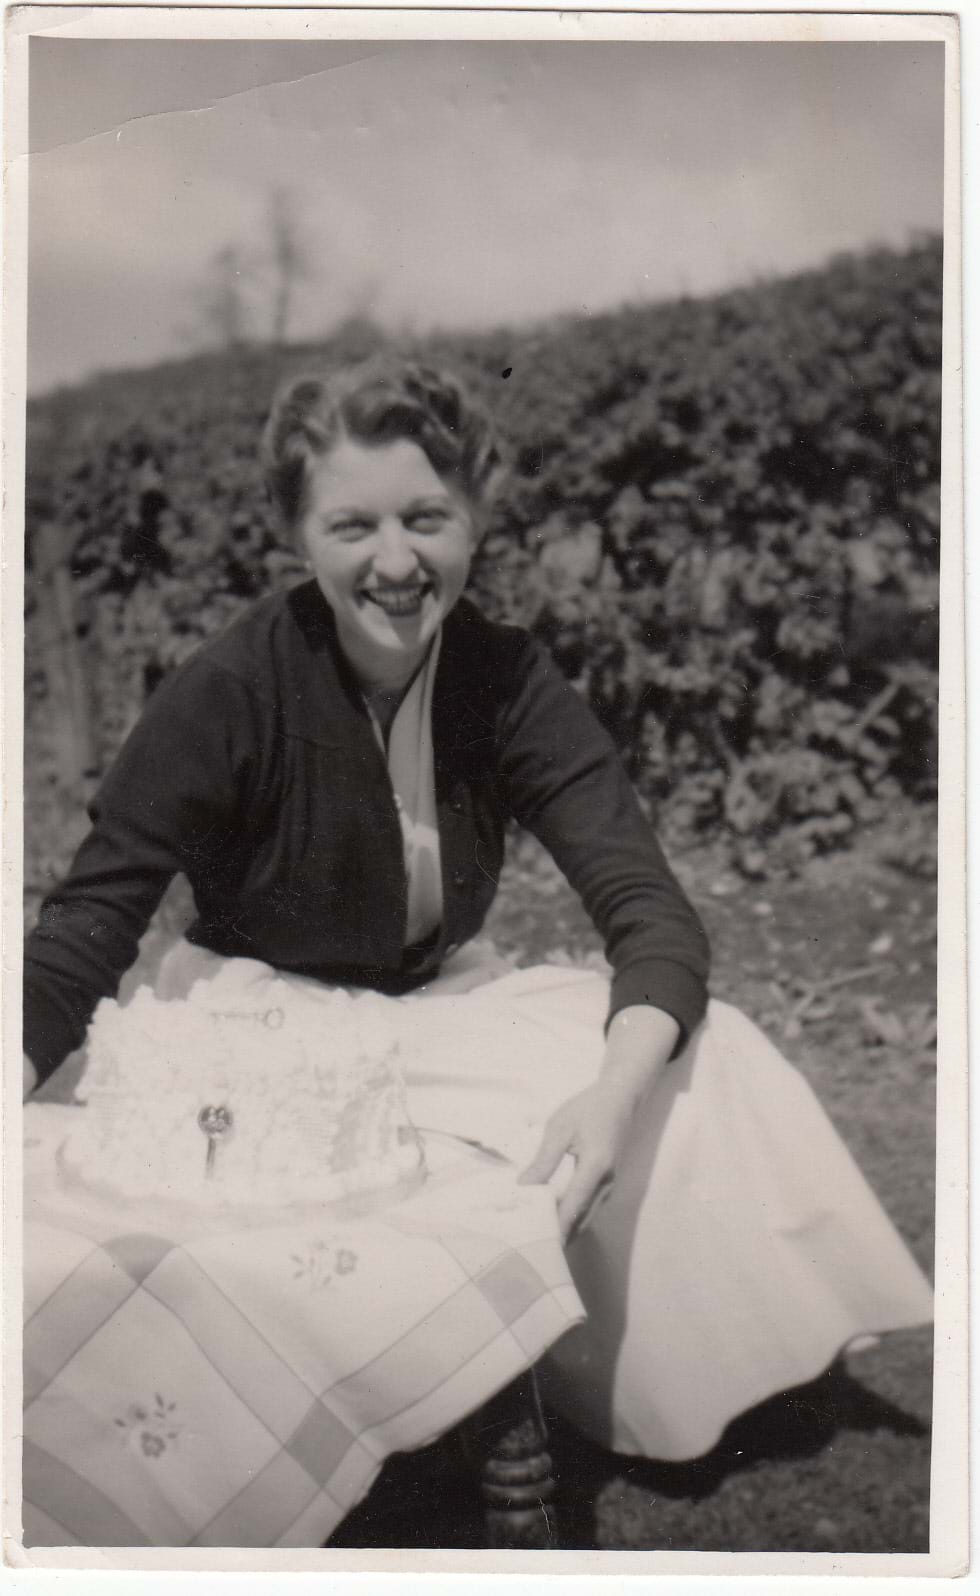 An image of Mary Graves, née Maw, age 21, who passed away from Mesothelioma